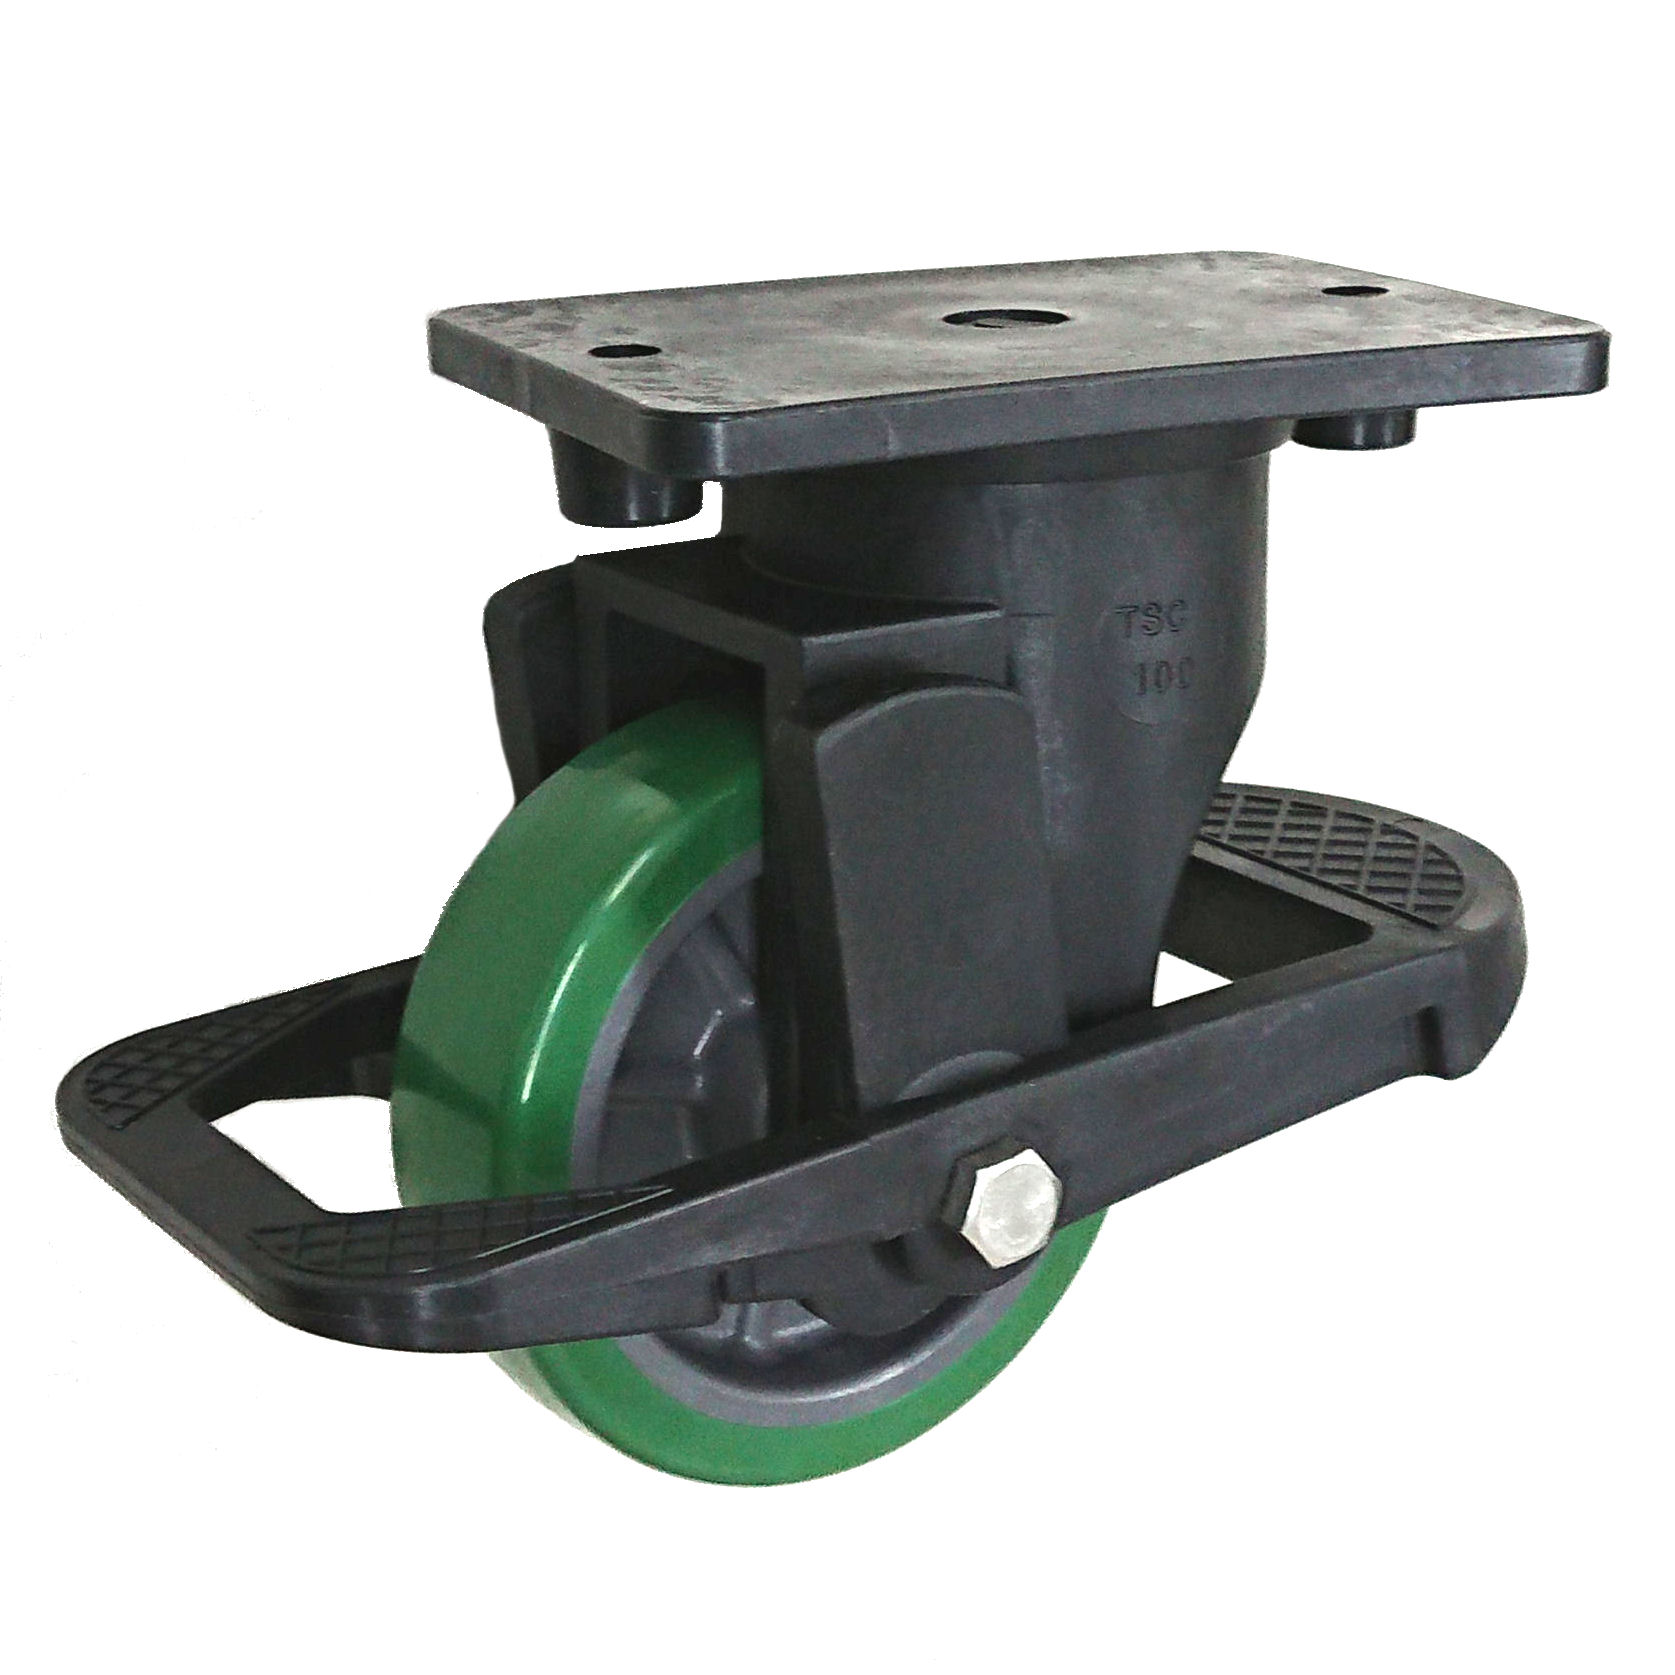 Casters - With resin frame, plate type. TJT-130